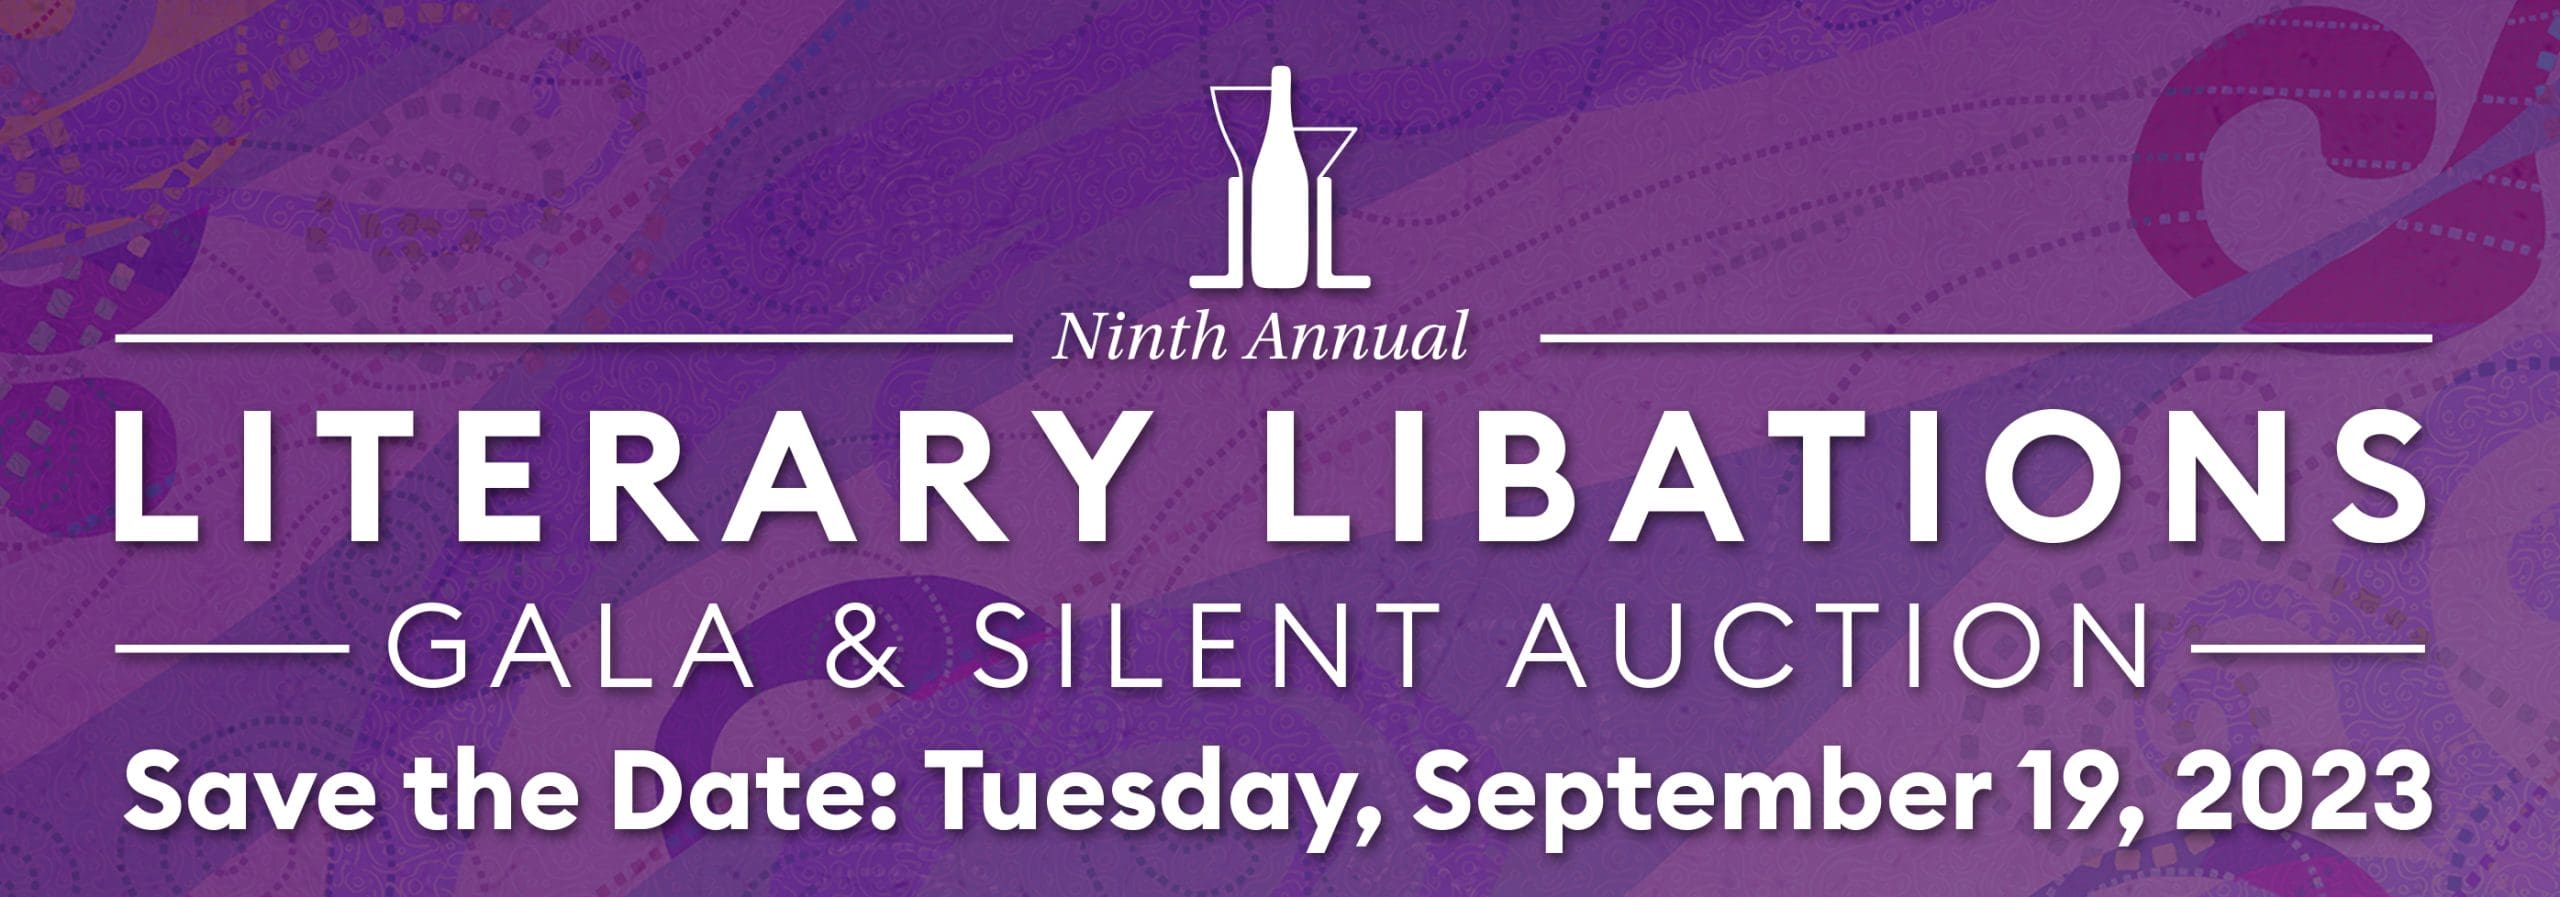 Literary Libations Gala & Silent Auction. Save the Date: Tuesday, September 19, 2023